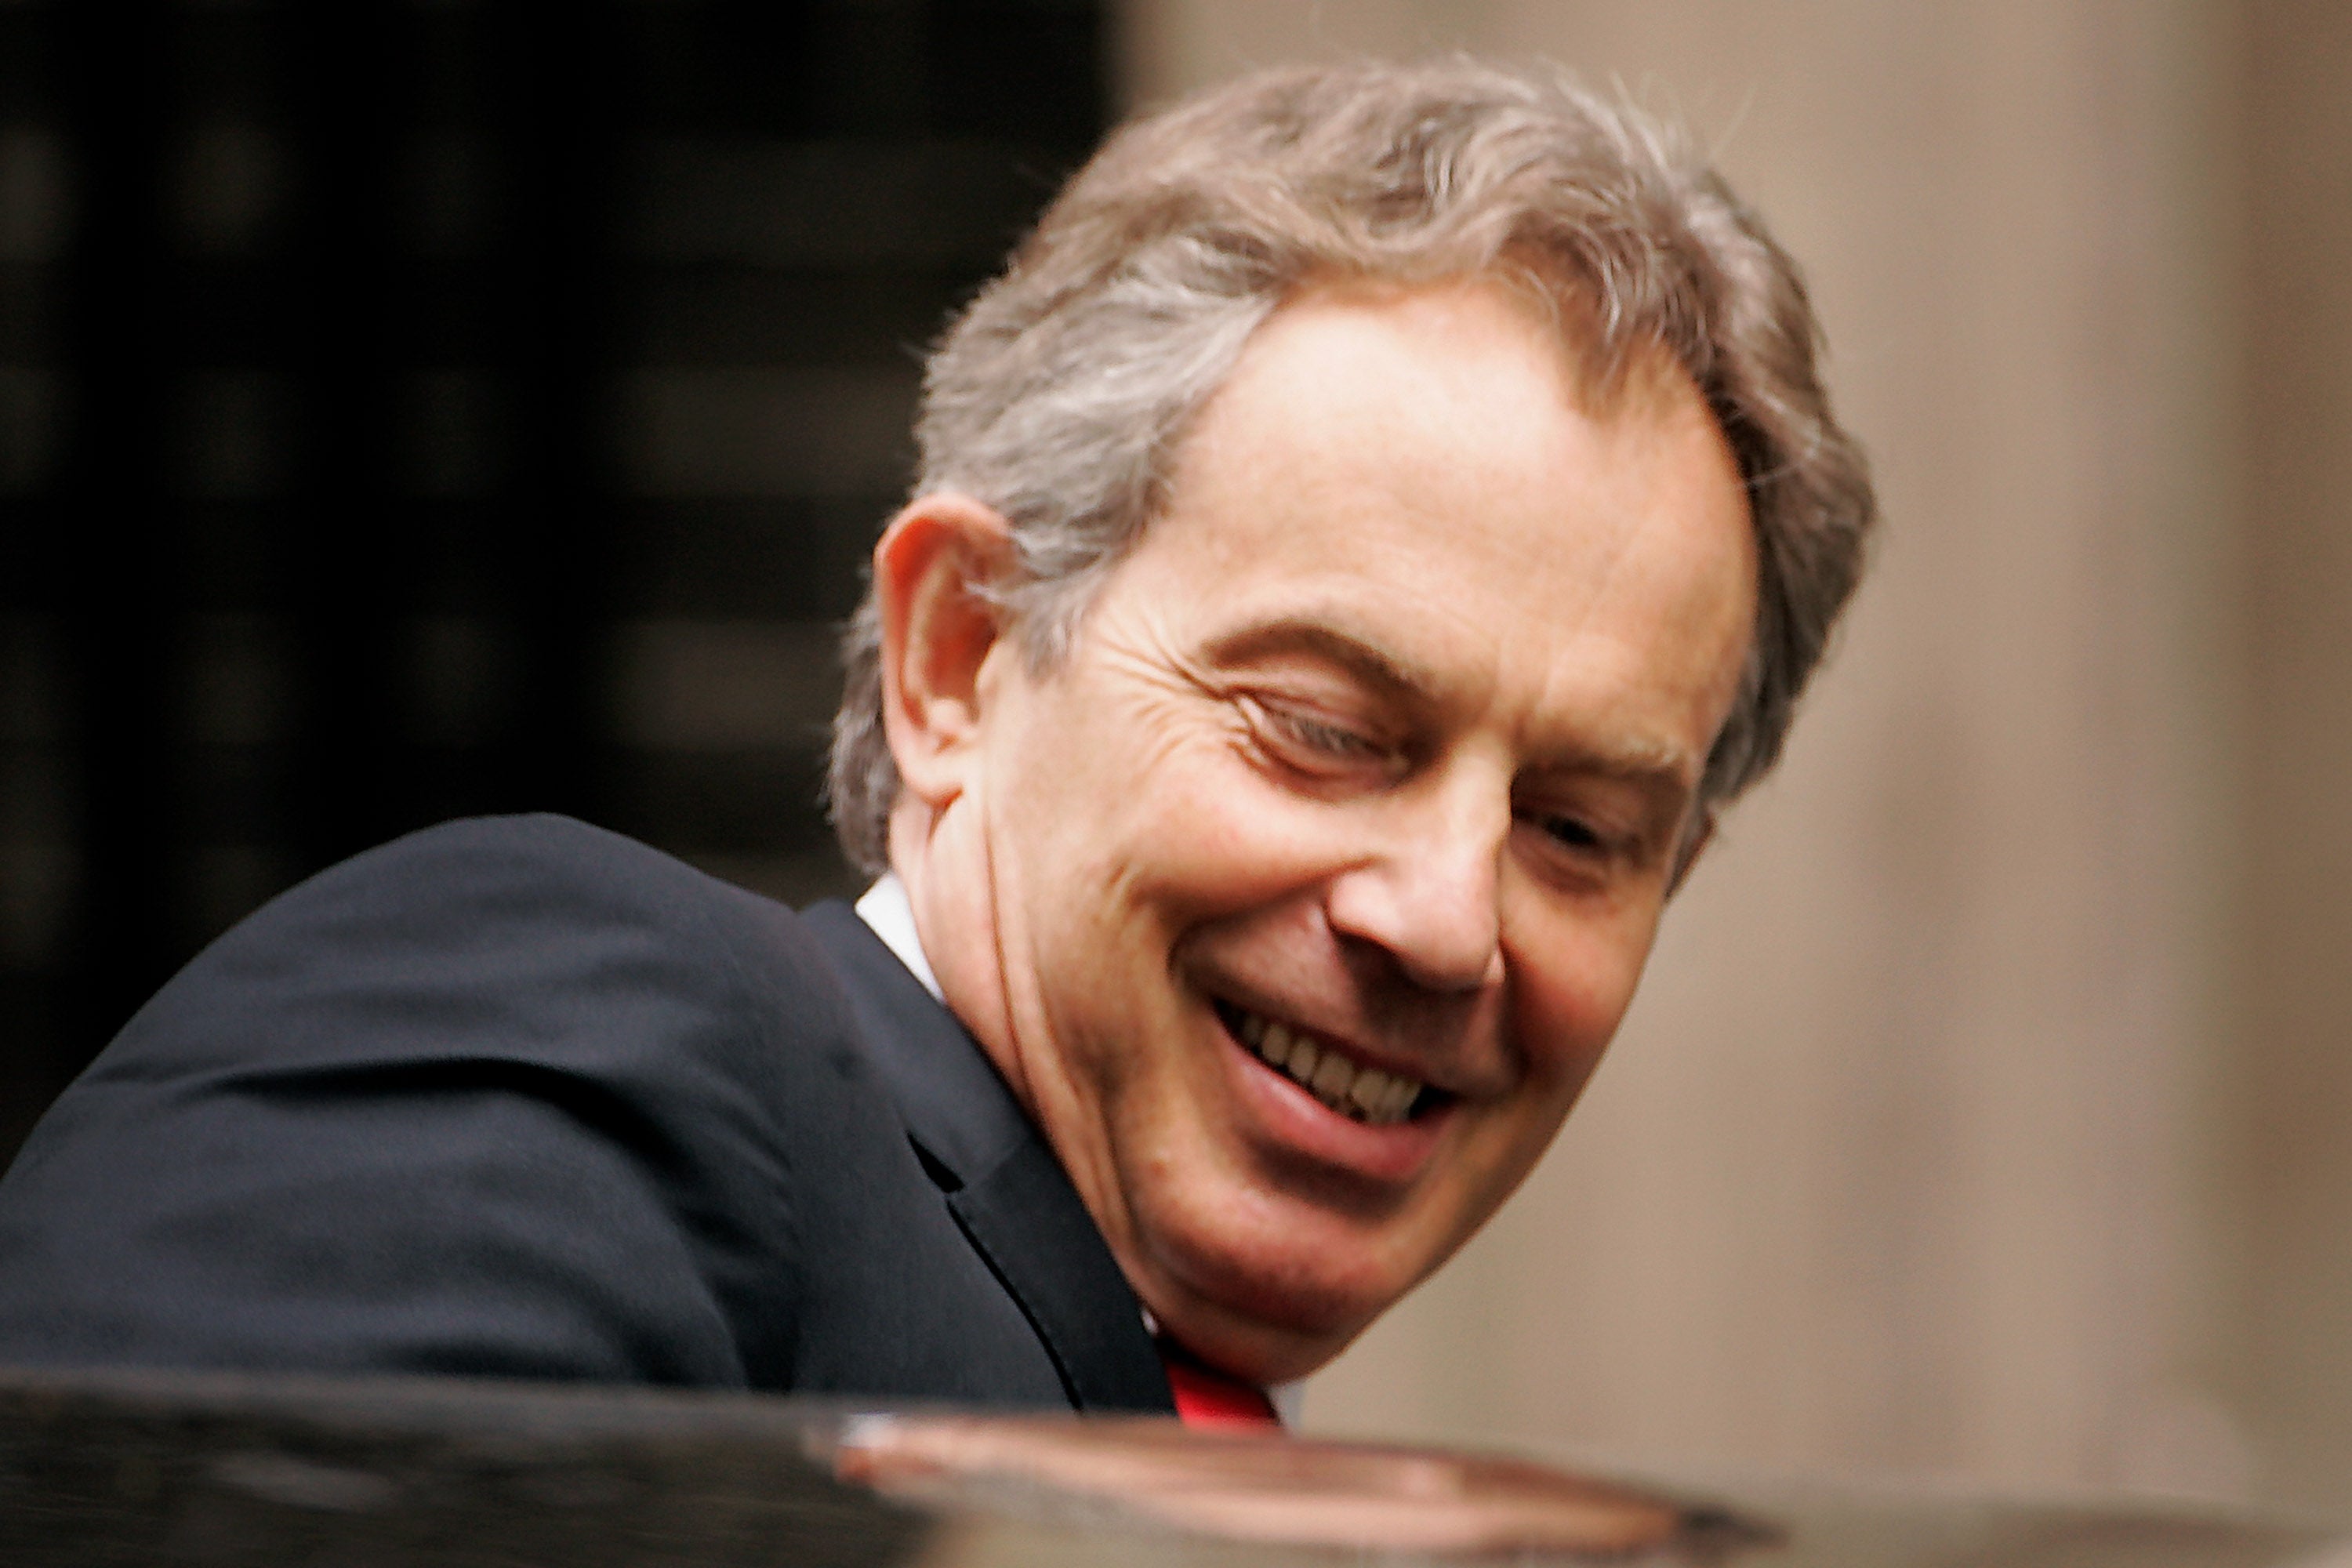 Tony Blair and the Liberal Democrats initially cooperated